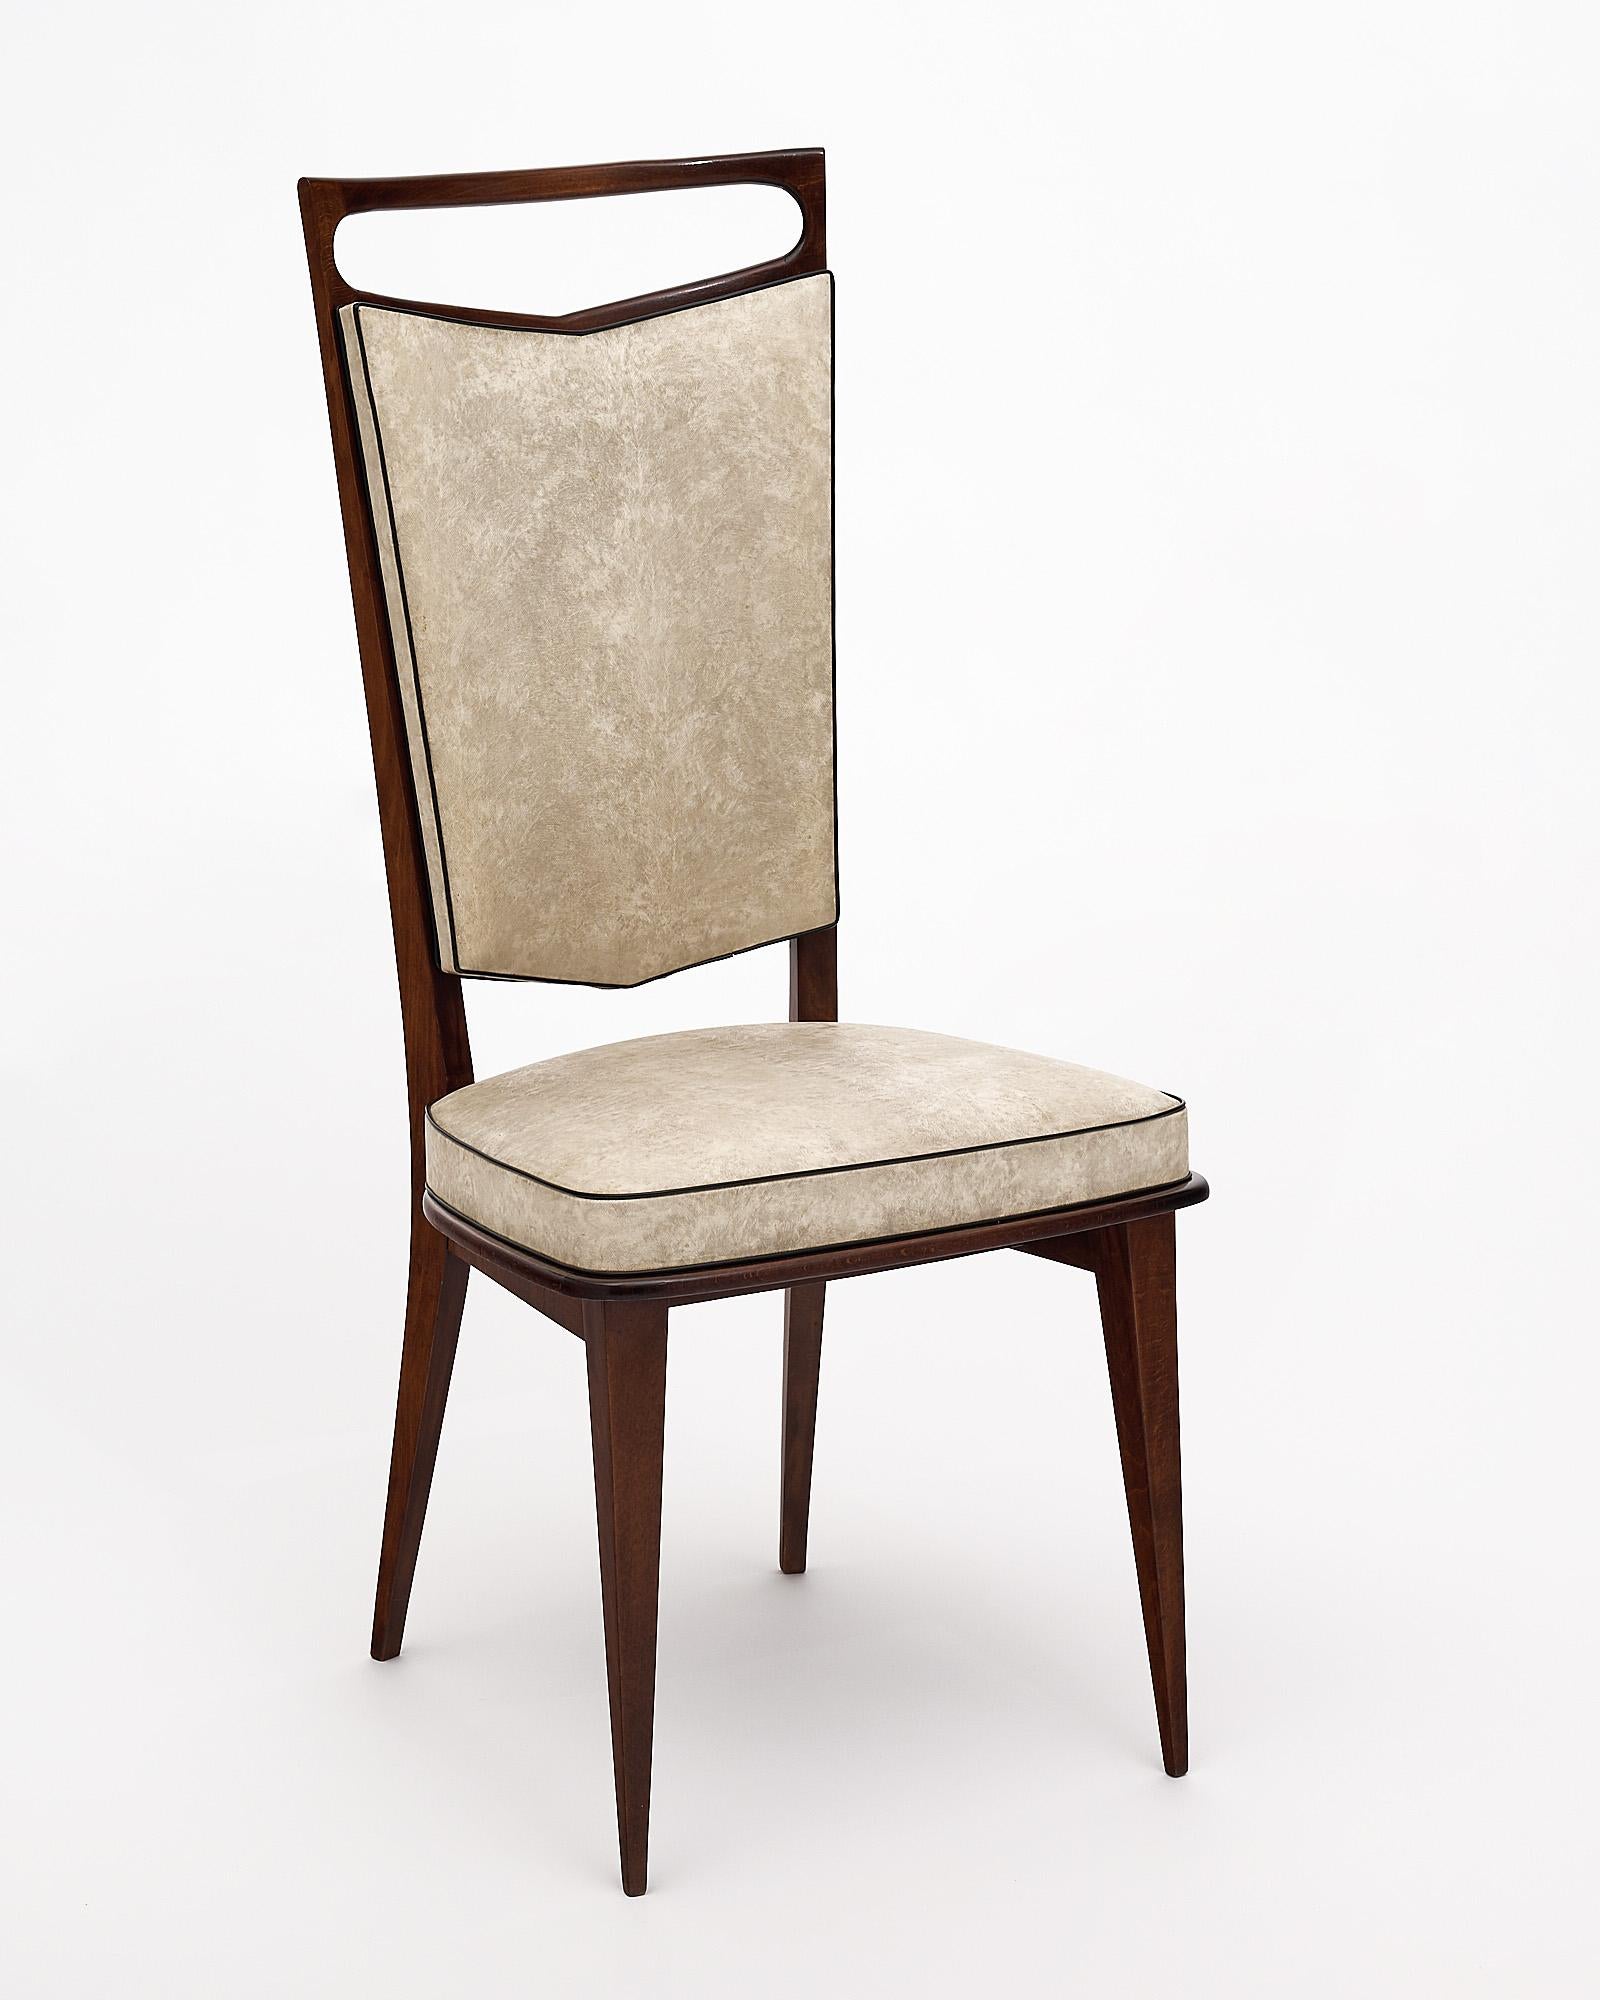 Set of six dining chairs, French, made of rosewood and finishing in a lustrous French polish. They have very strong frames and are comfortable. The chairs are upholstered in the original skay, in fair condition.